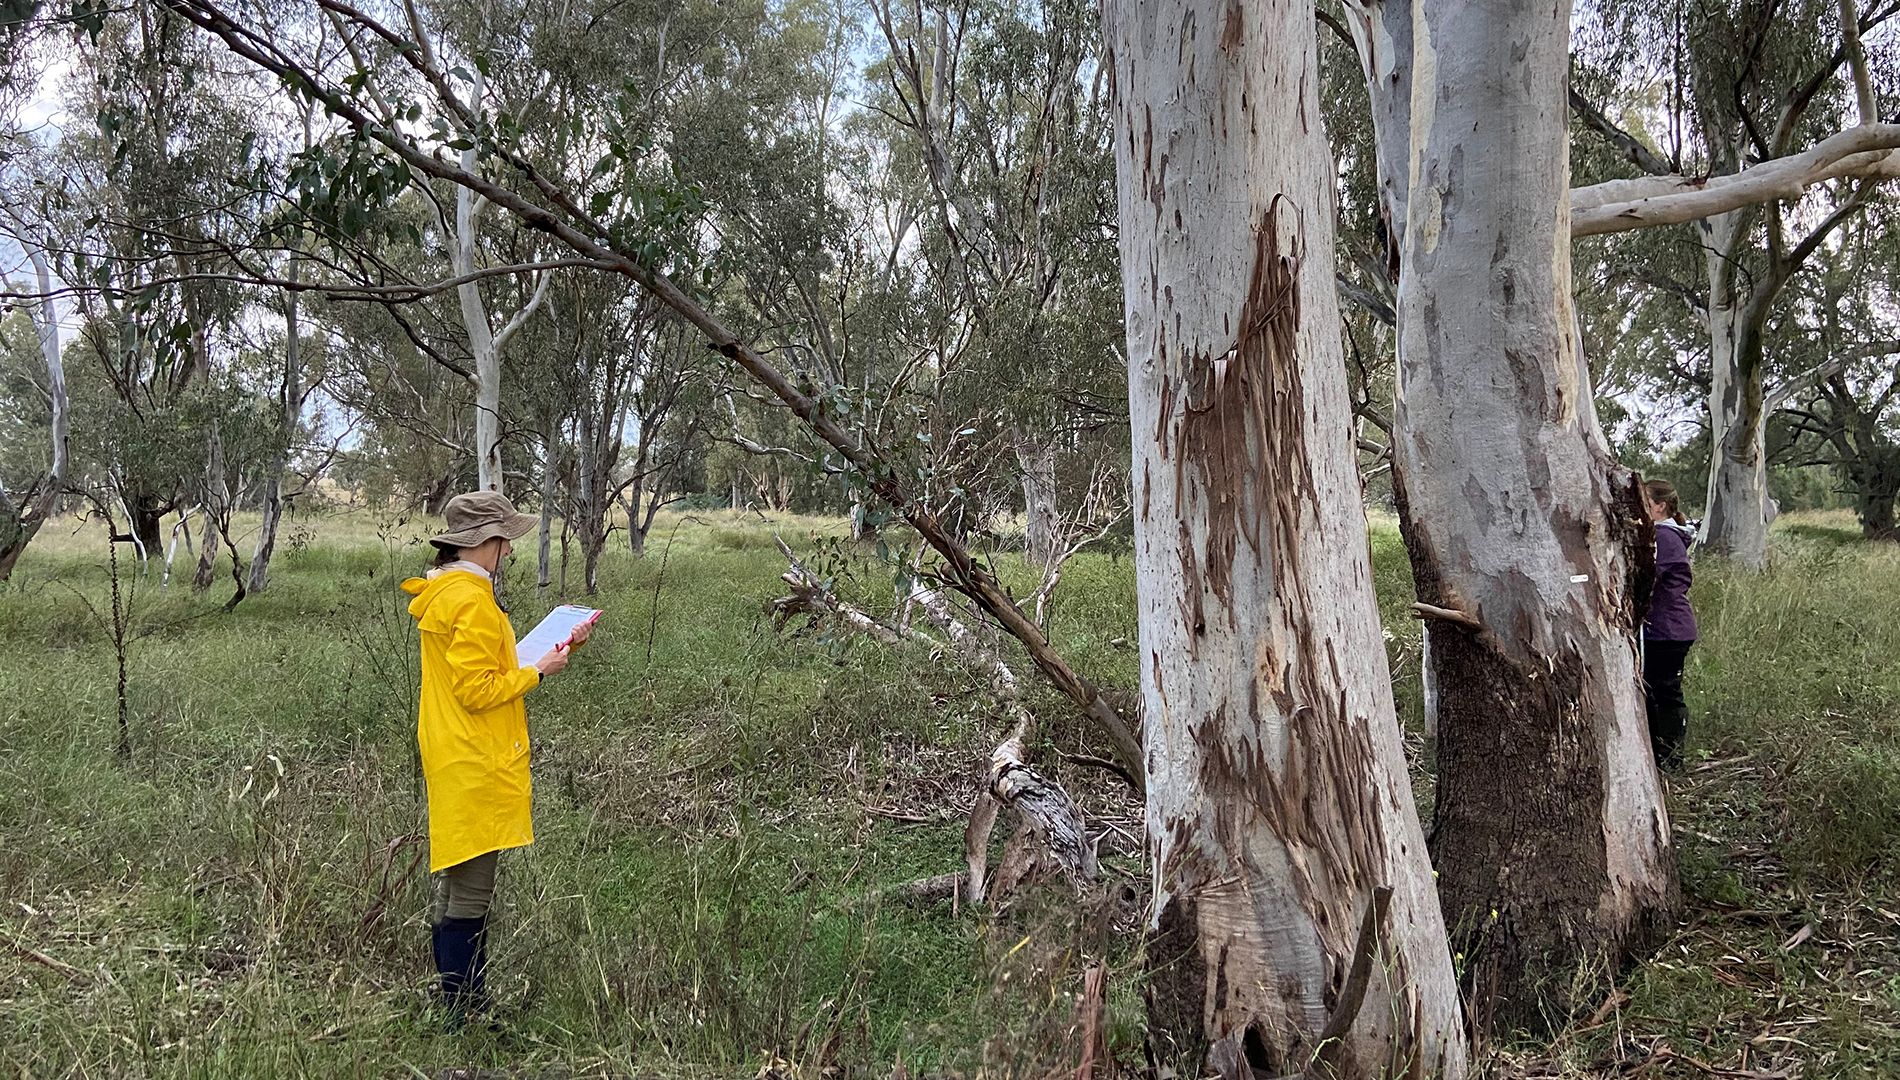 Department field team measuring tree growth and health in the Northern Murray Darling Basin.